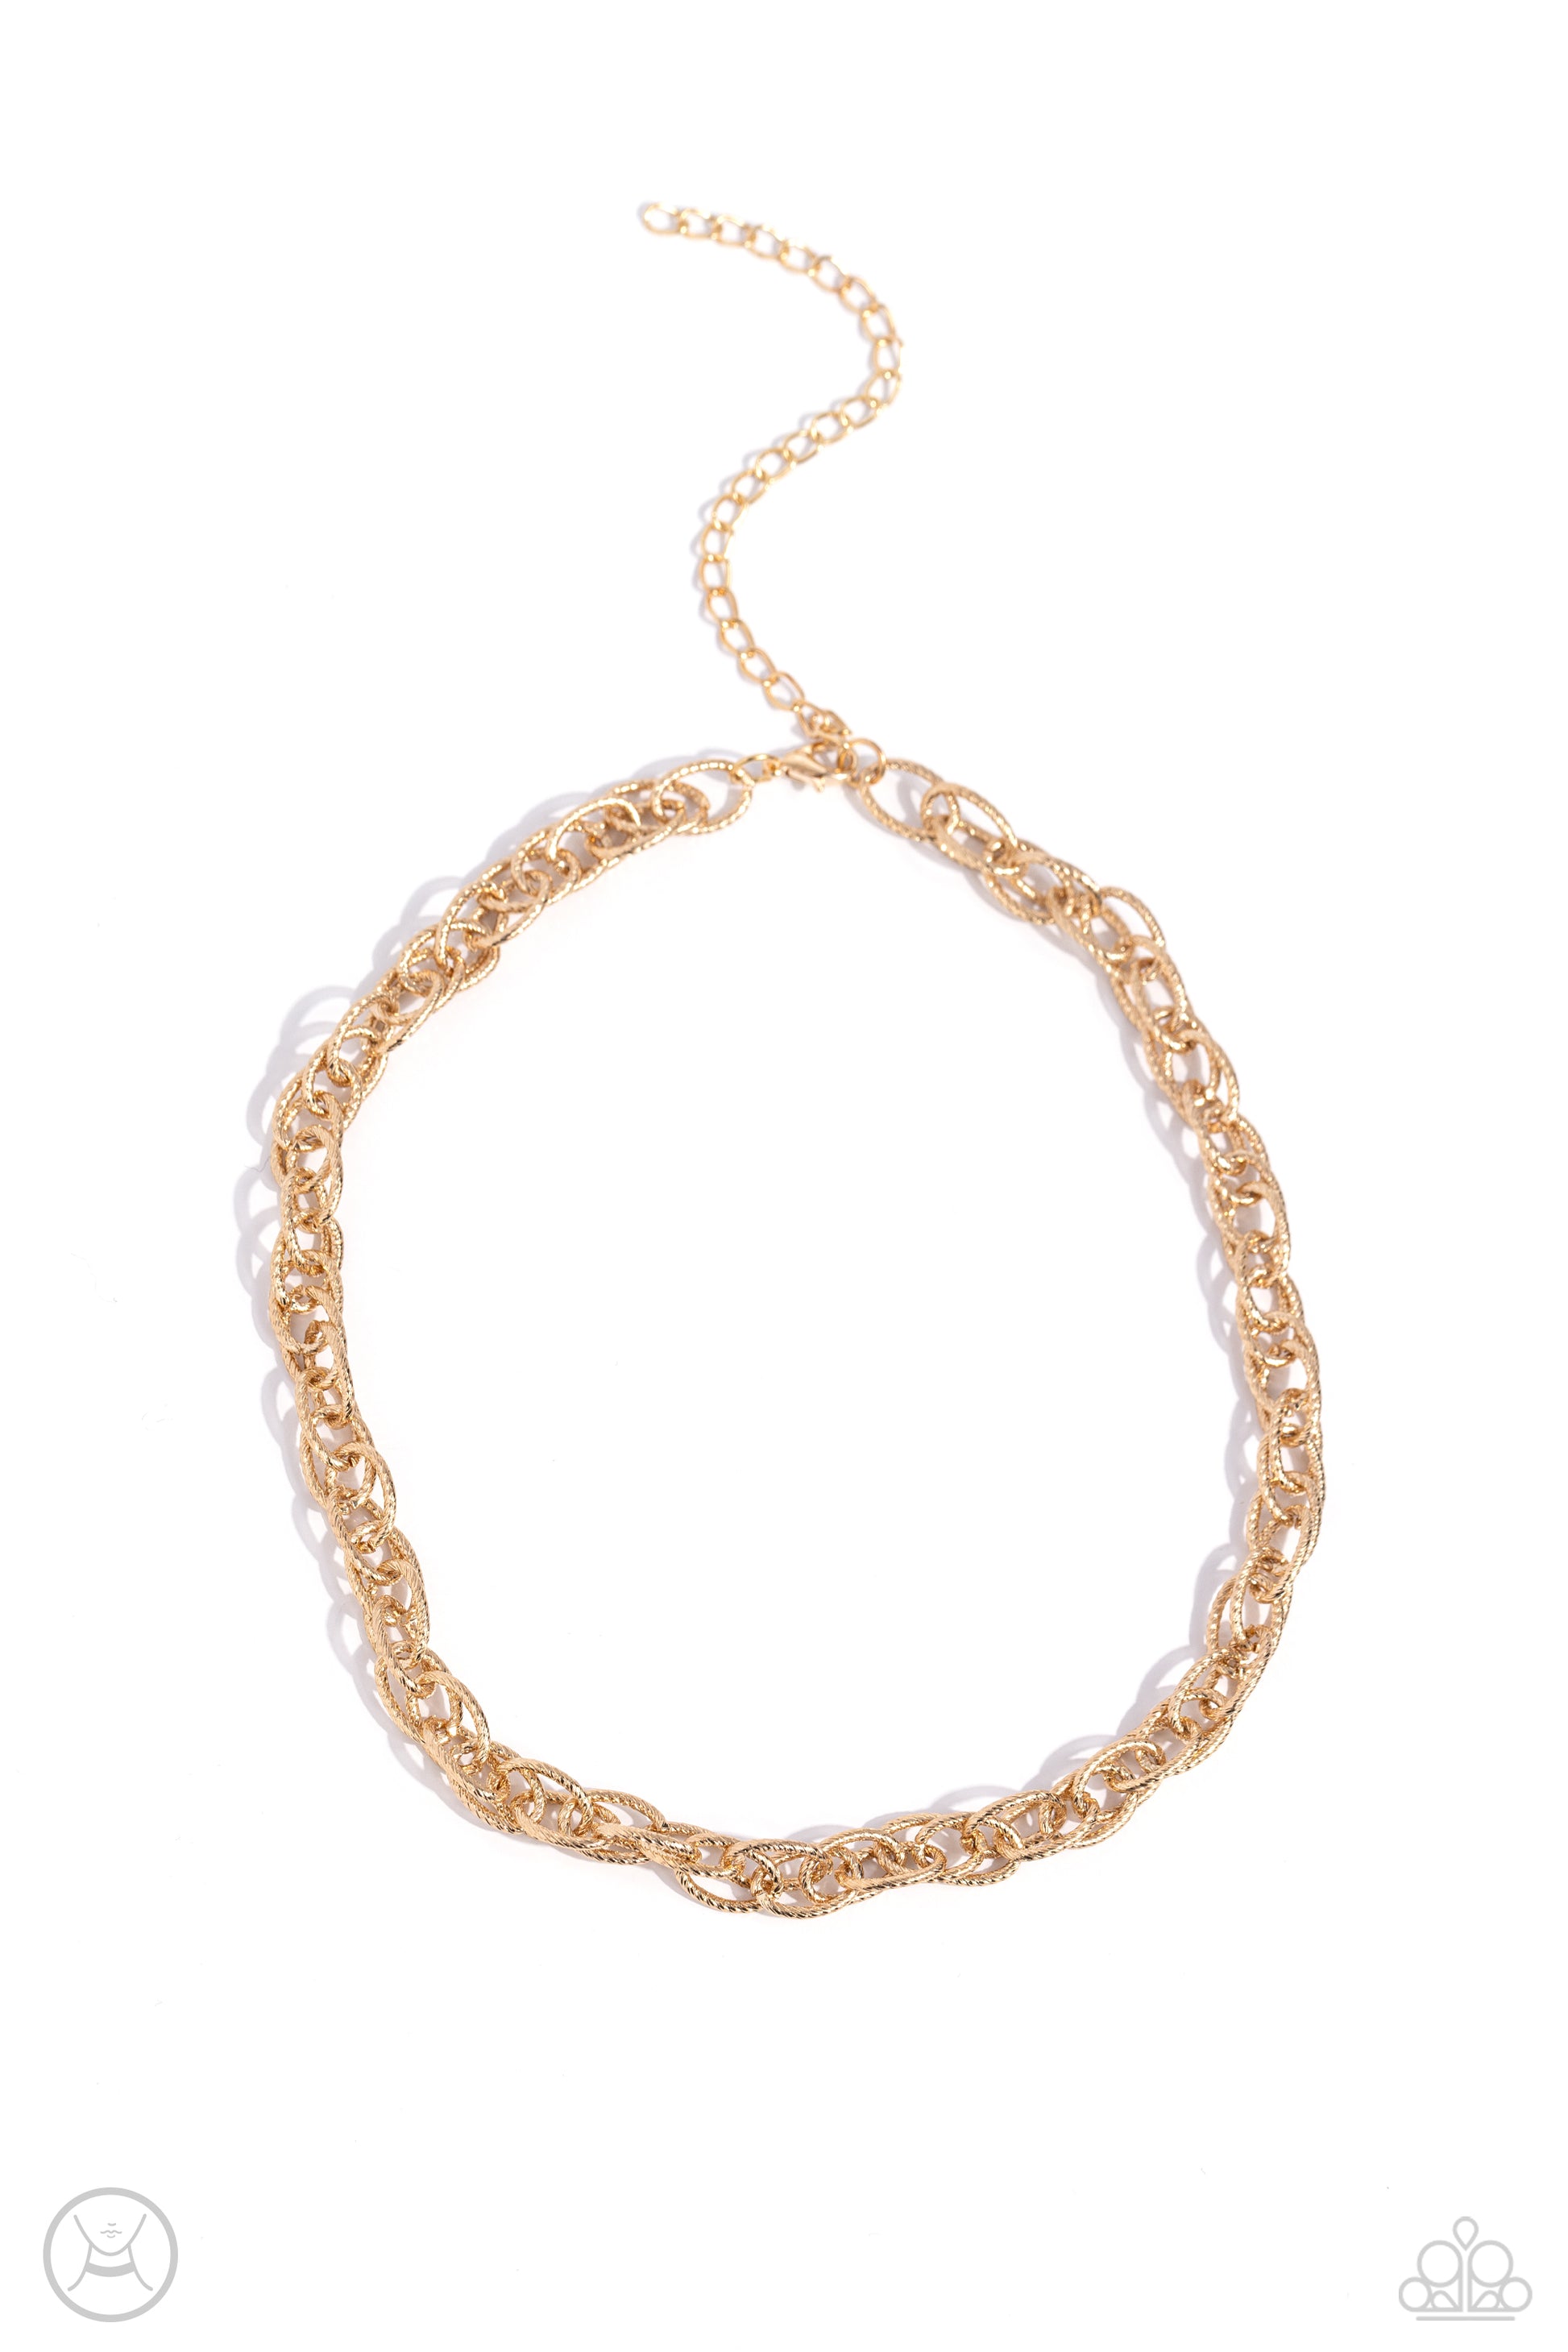 If I Only Had a CHAIN - gold - Paparazzi necklace